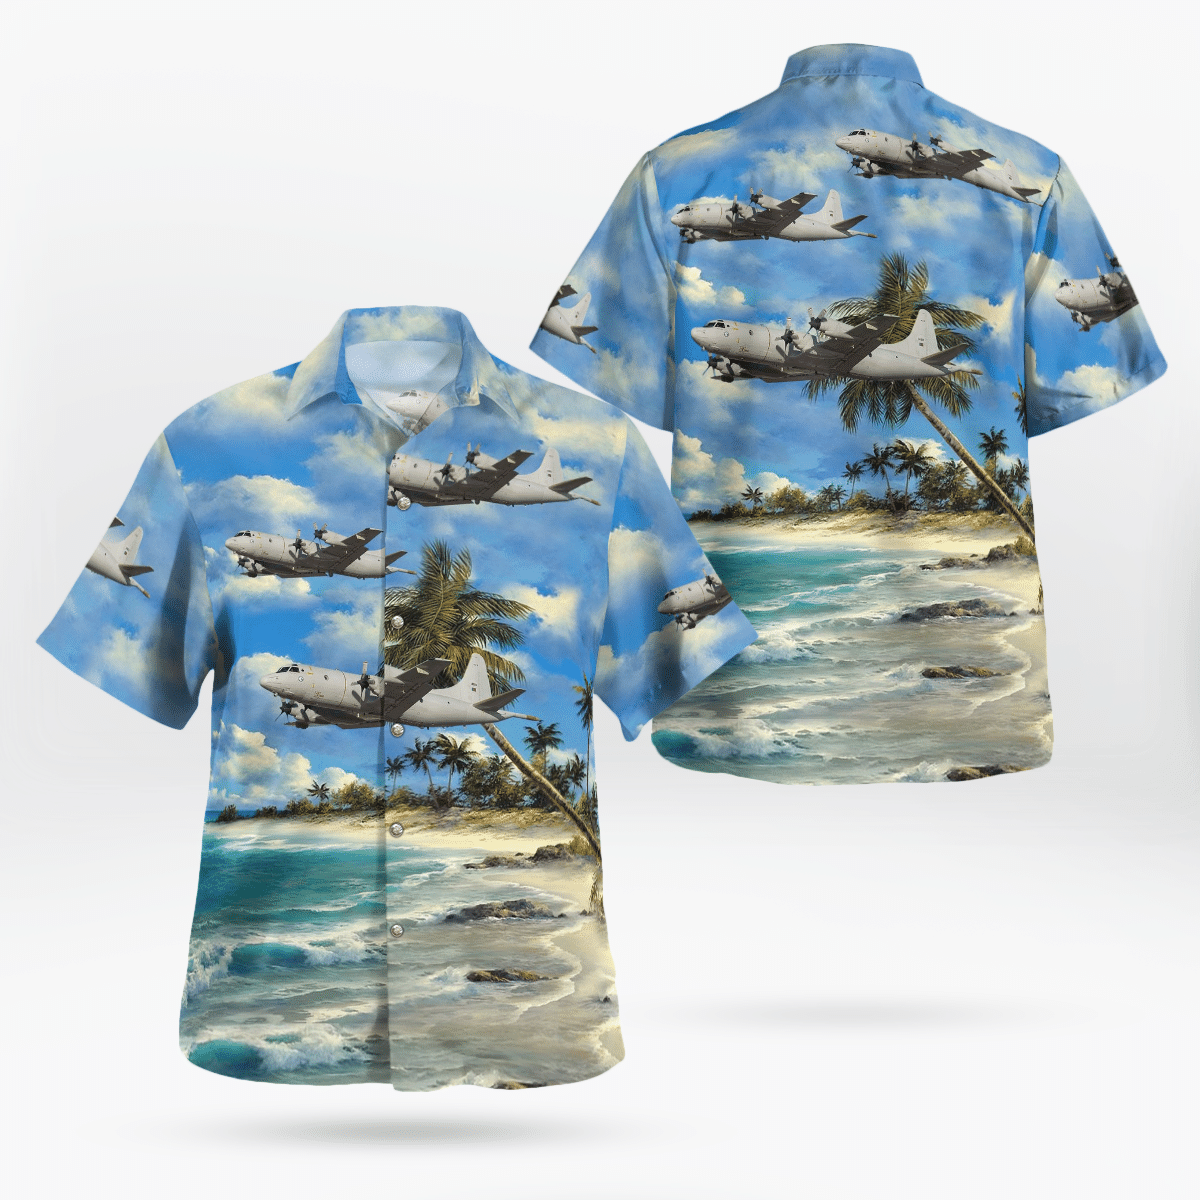 Some cool 3d hawaii shirt for this summer 45